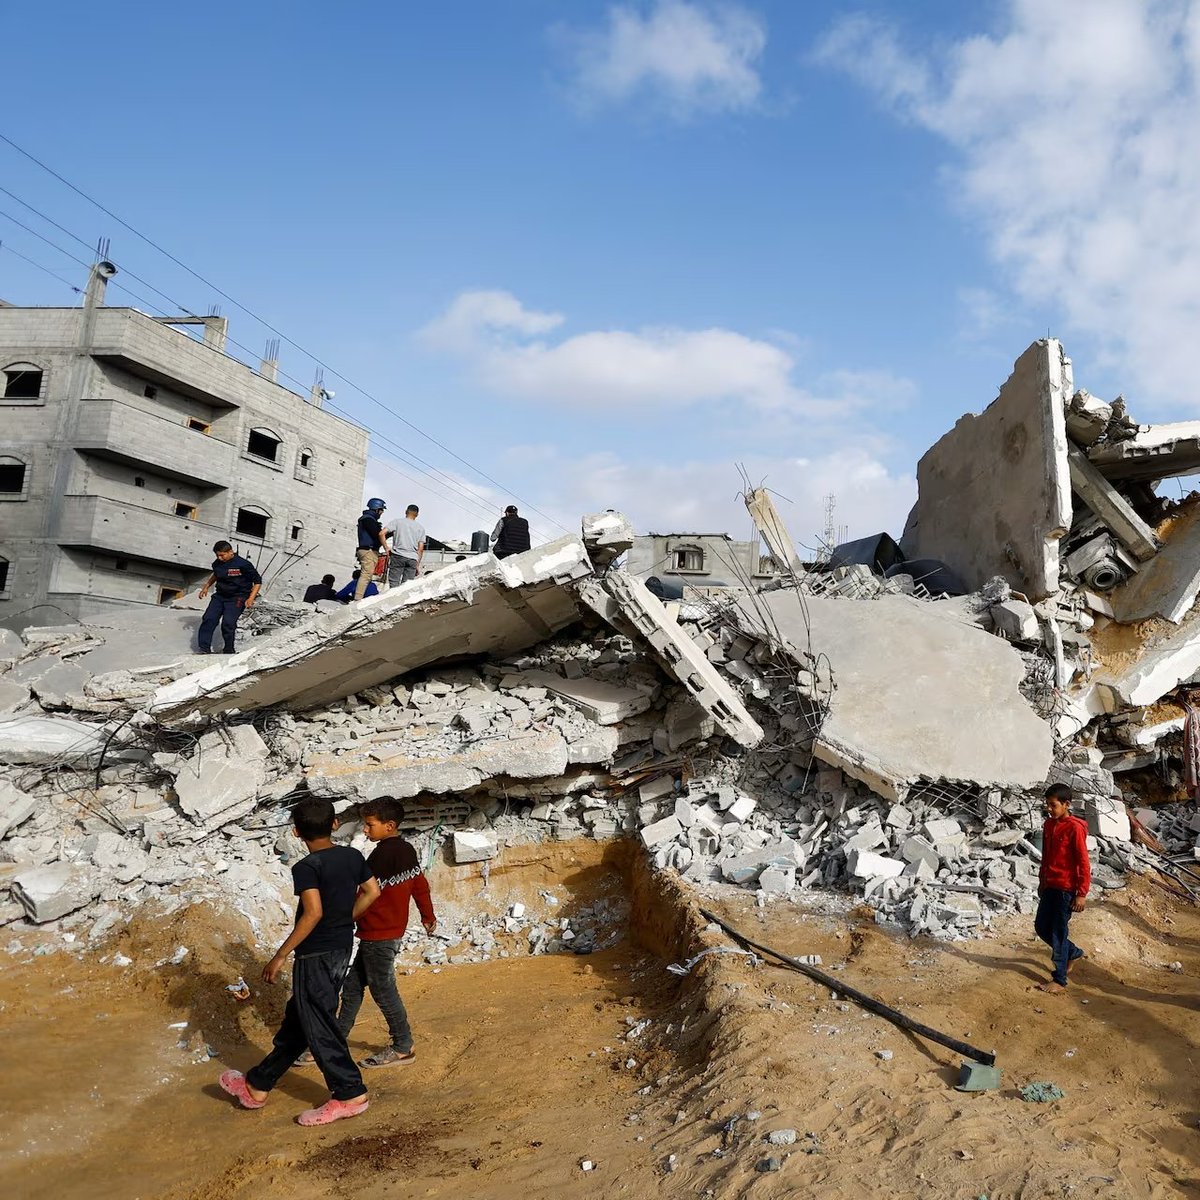 🚨🇺🇸🇮🇱U.S OFFICIALS: ISRAEL MAY BE BREAKING INTERNATIONAL LAW IN GAZA

A leaked internal memo from senior officials to Blinken revealed they do not find Israel’s assurances they are using U.S supplied weapons in accordance with international law “credible or reliable.”

Four…